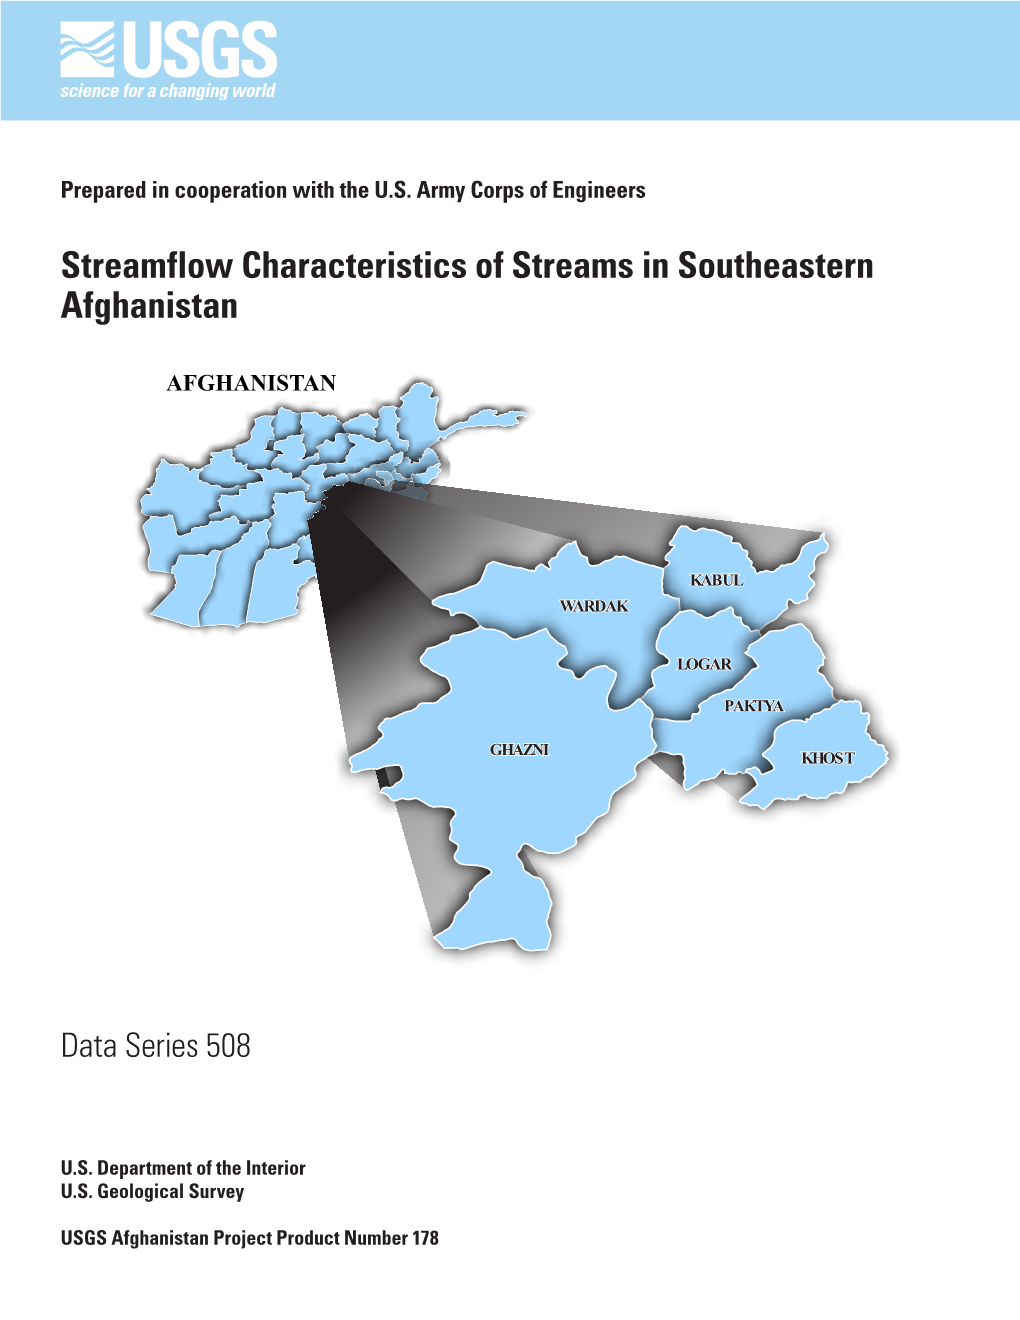 Streamflow Characteristics of Streams in Southeastern Afghanistan